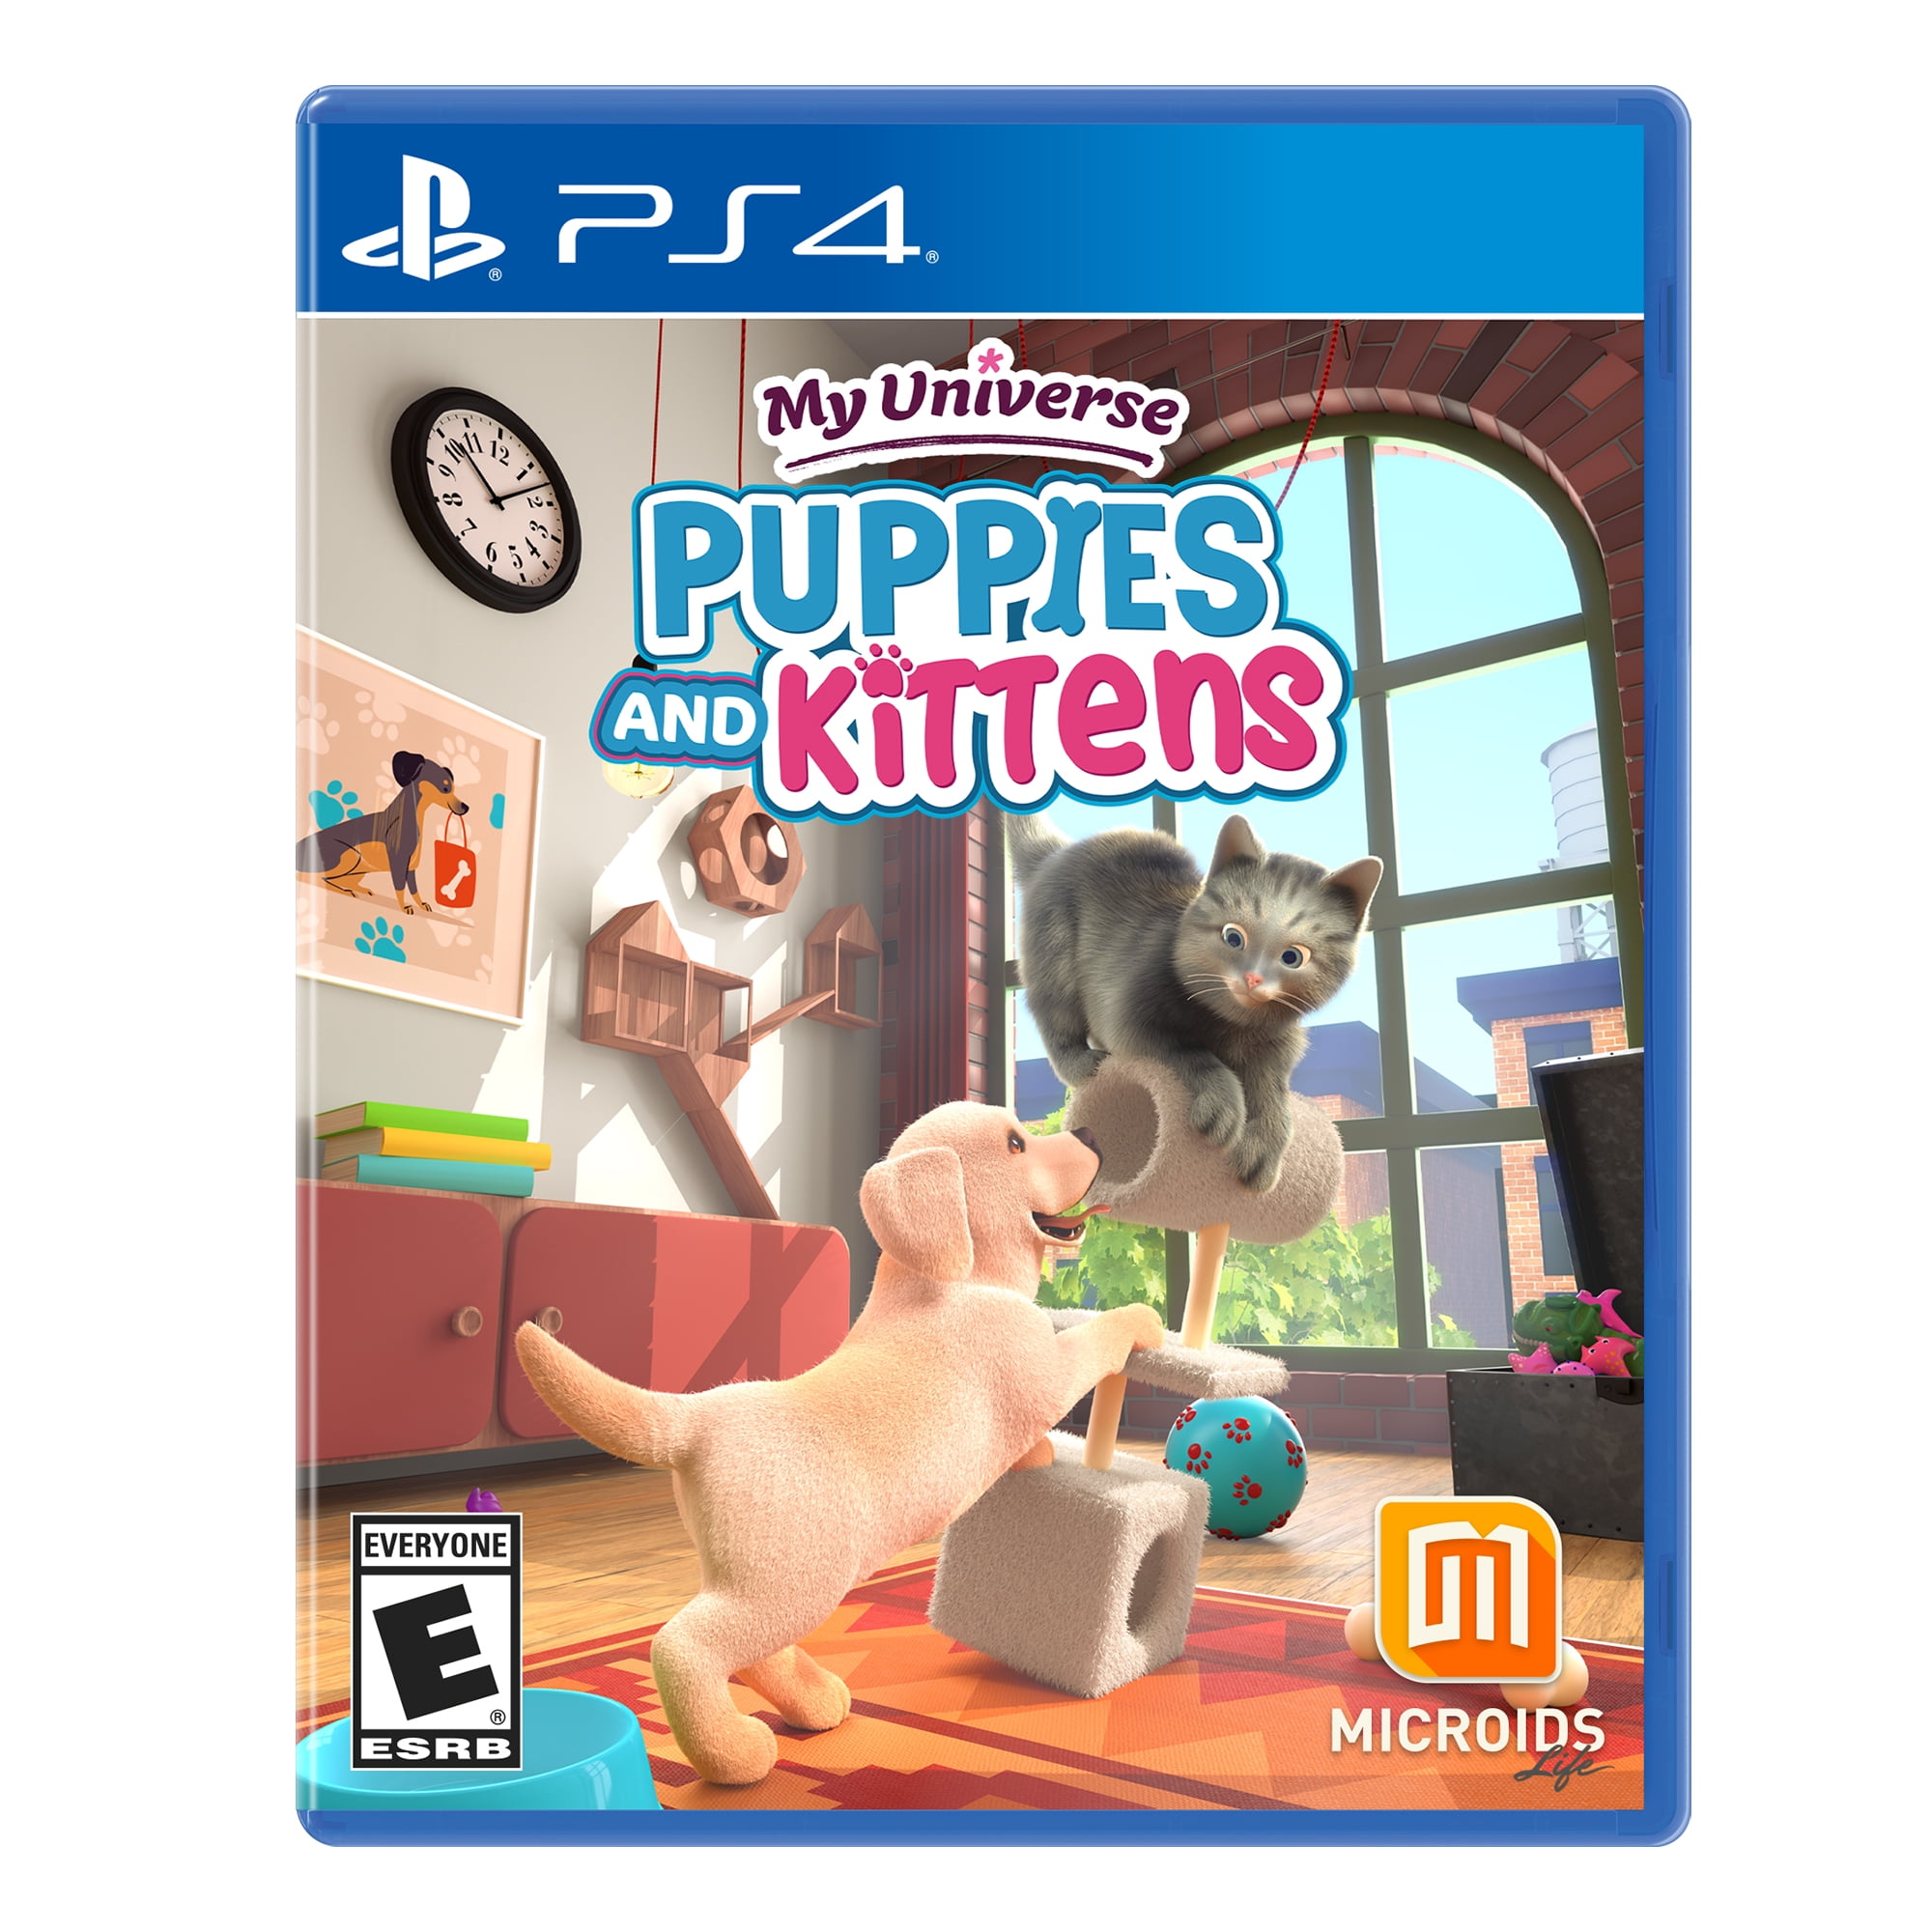 My Universe: Puppies and Kittens, Maximum Games, Nintendo Switch,  850024479272 